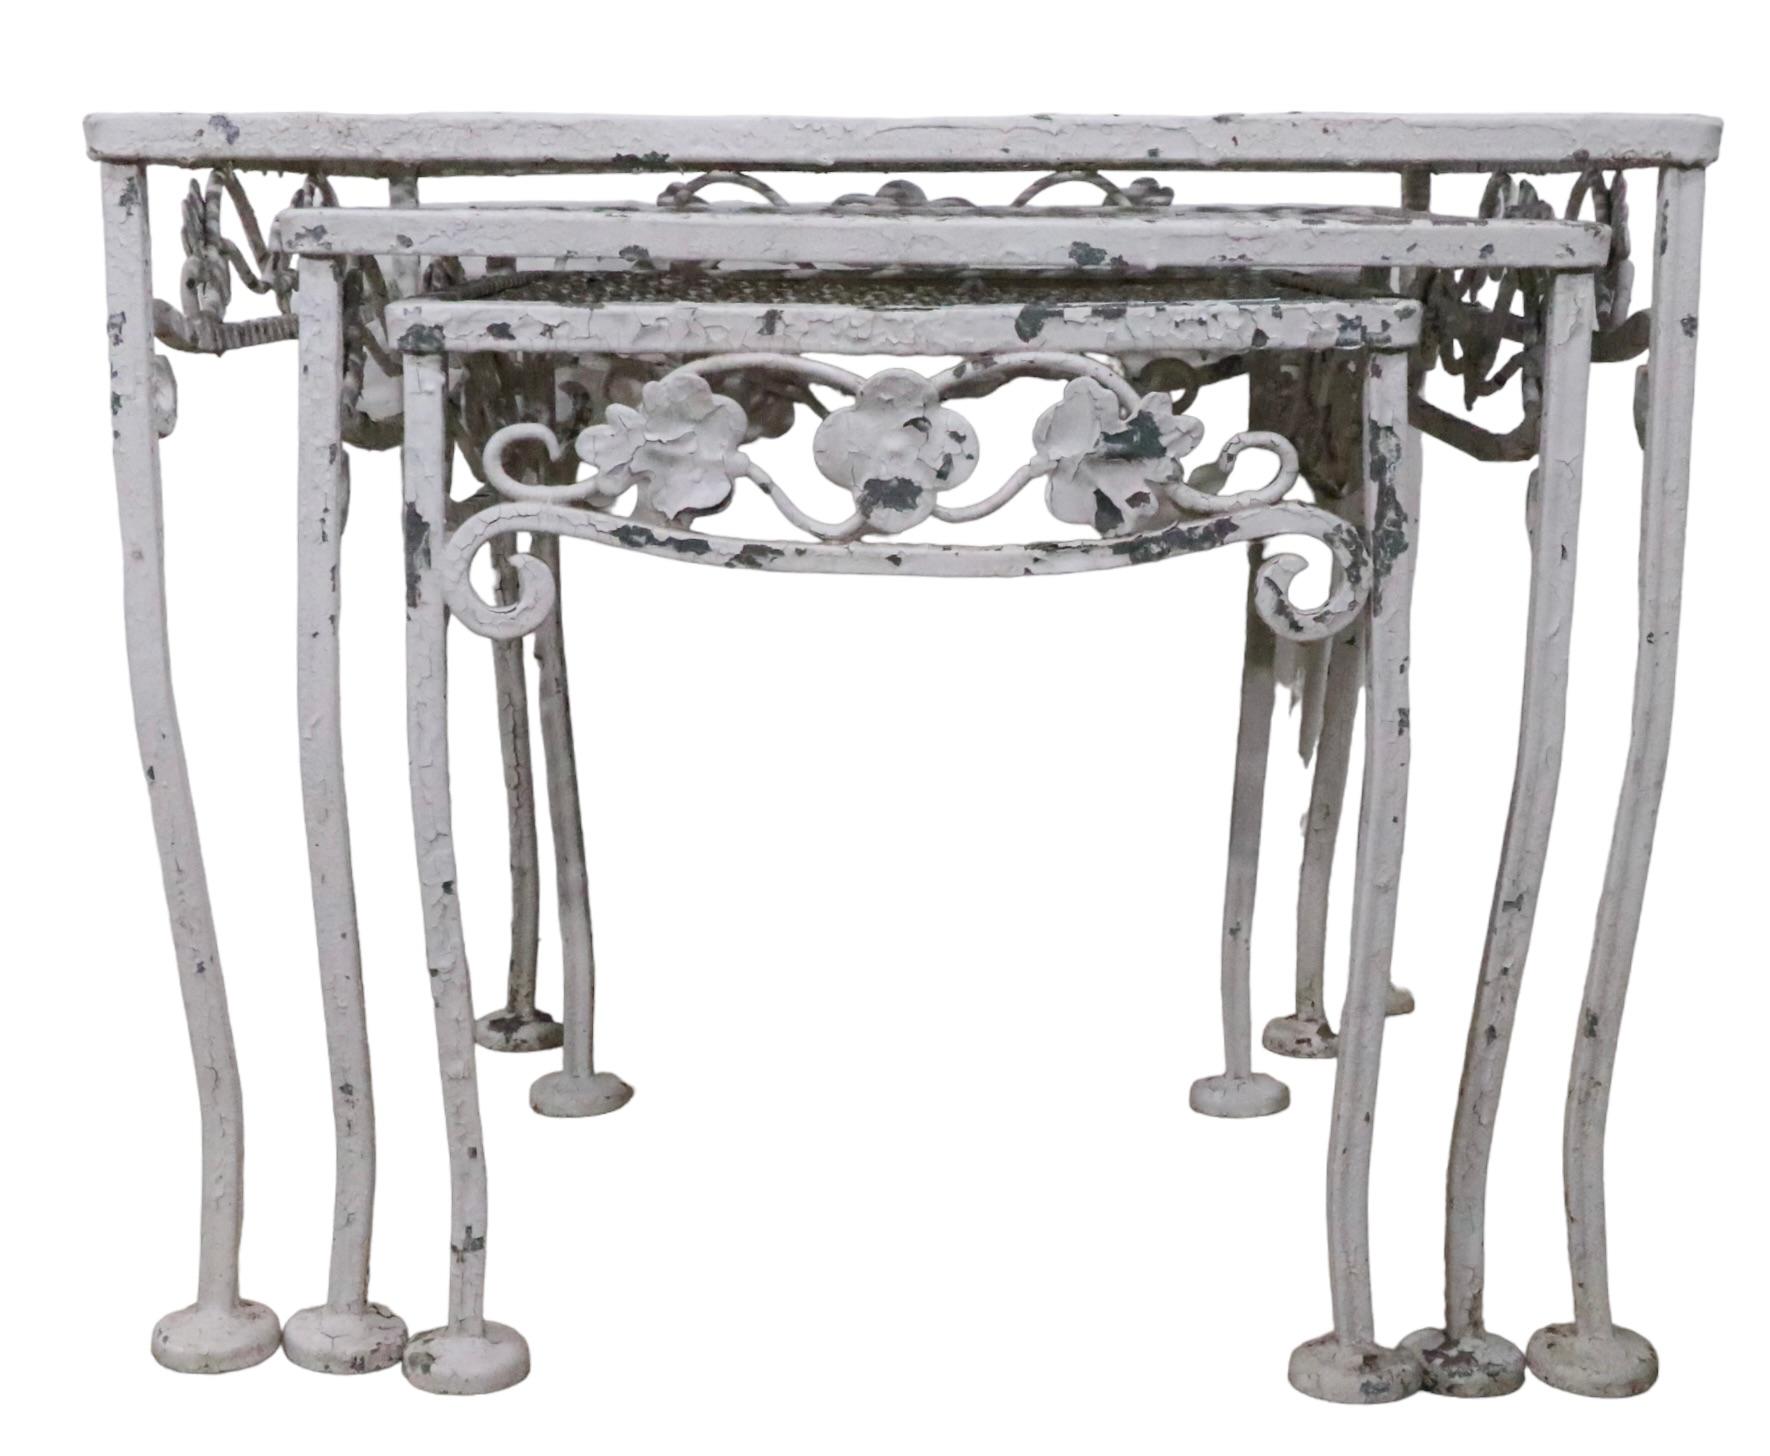 Charming set of three wrought iron nesting tables with decorative foliate trim, wrought legs, and metal mesh tops. The tables are structurally sound and sturdy, free of breaks, bends or repairs. The paint finish shows wear, peeling , loss etc.